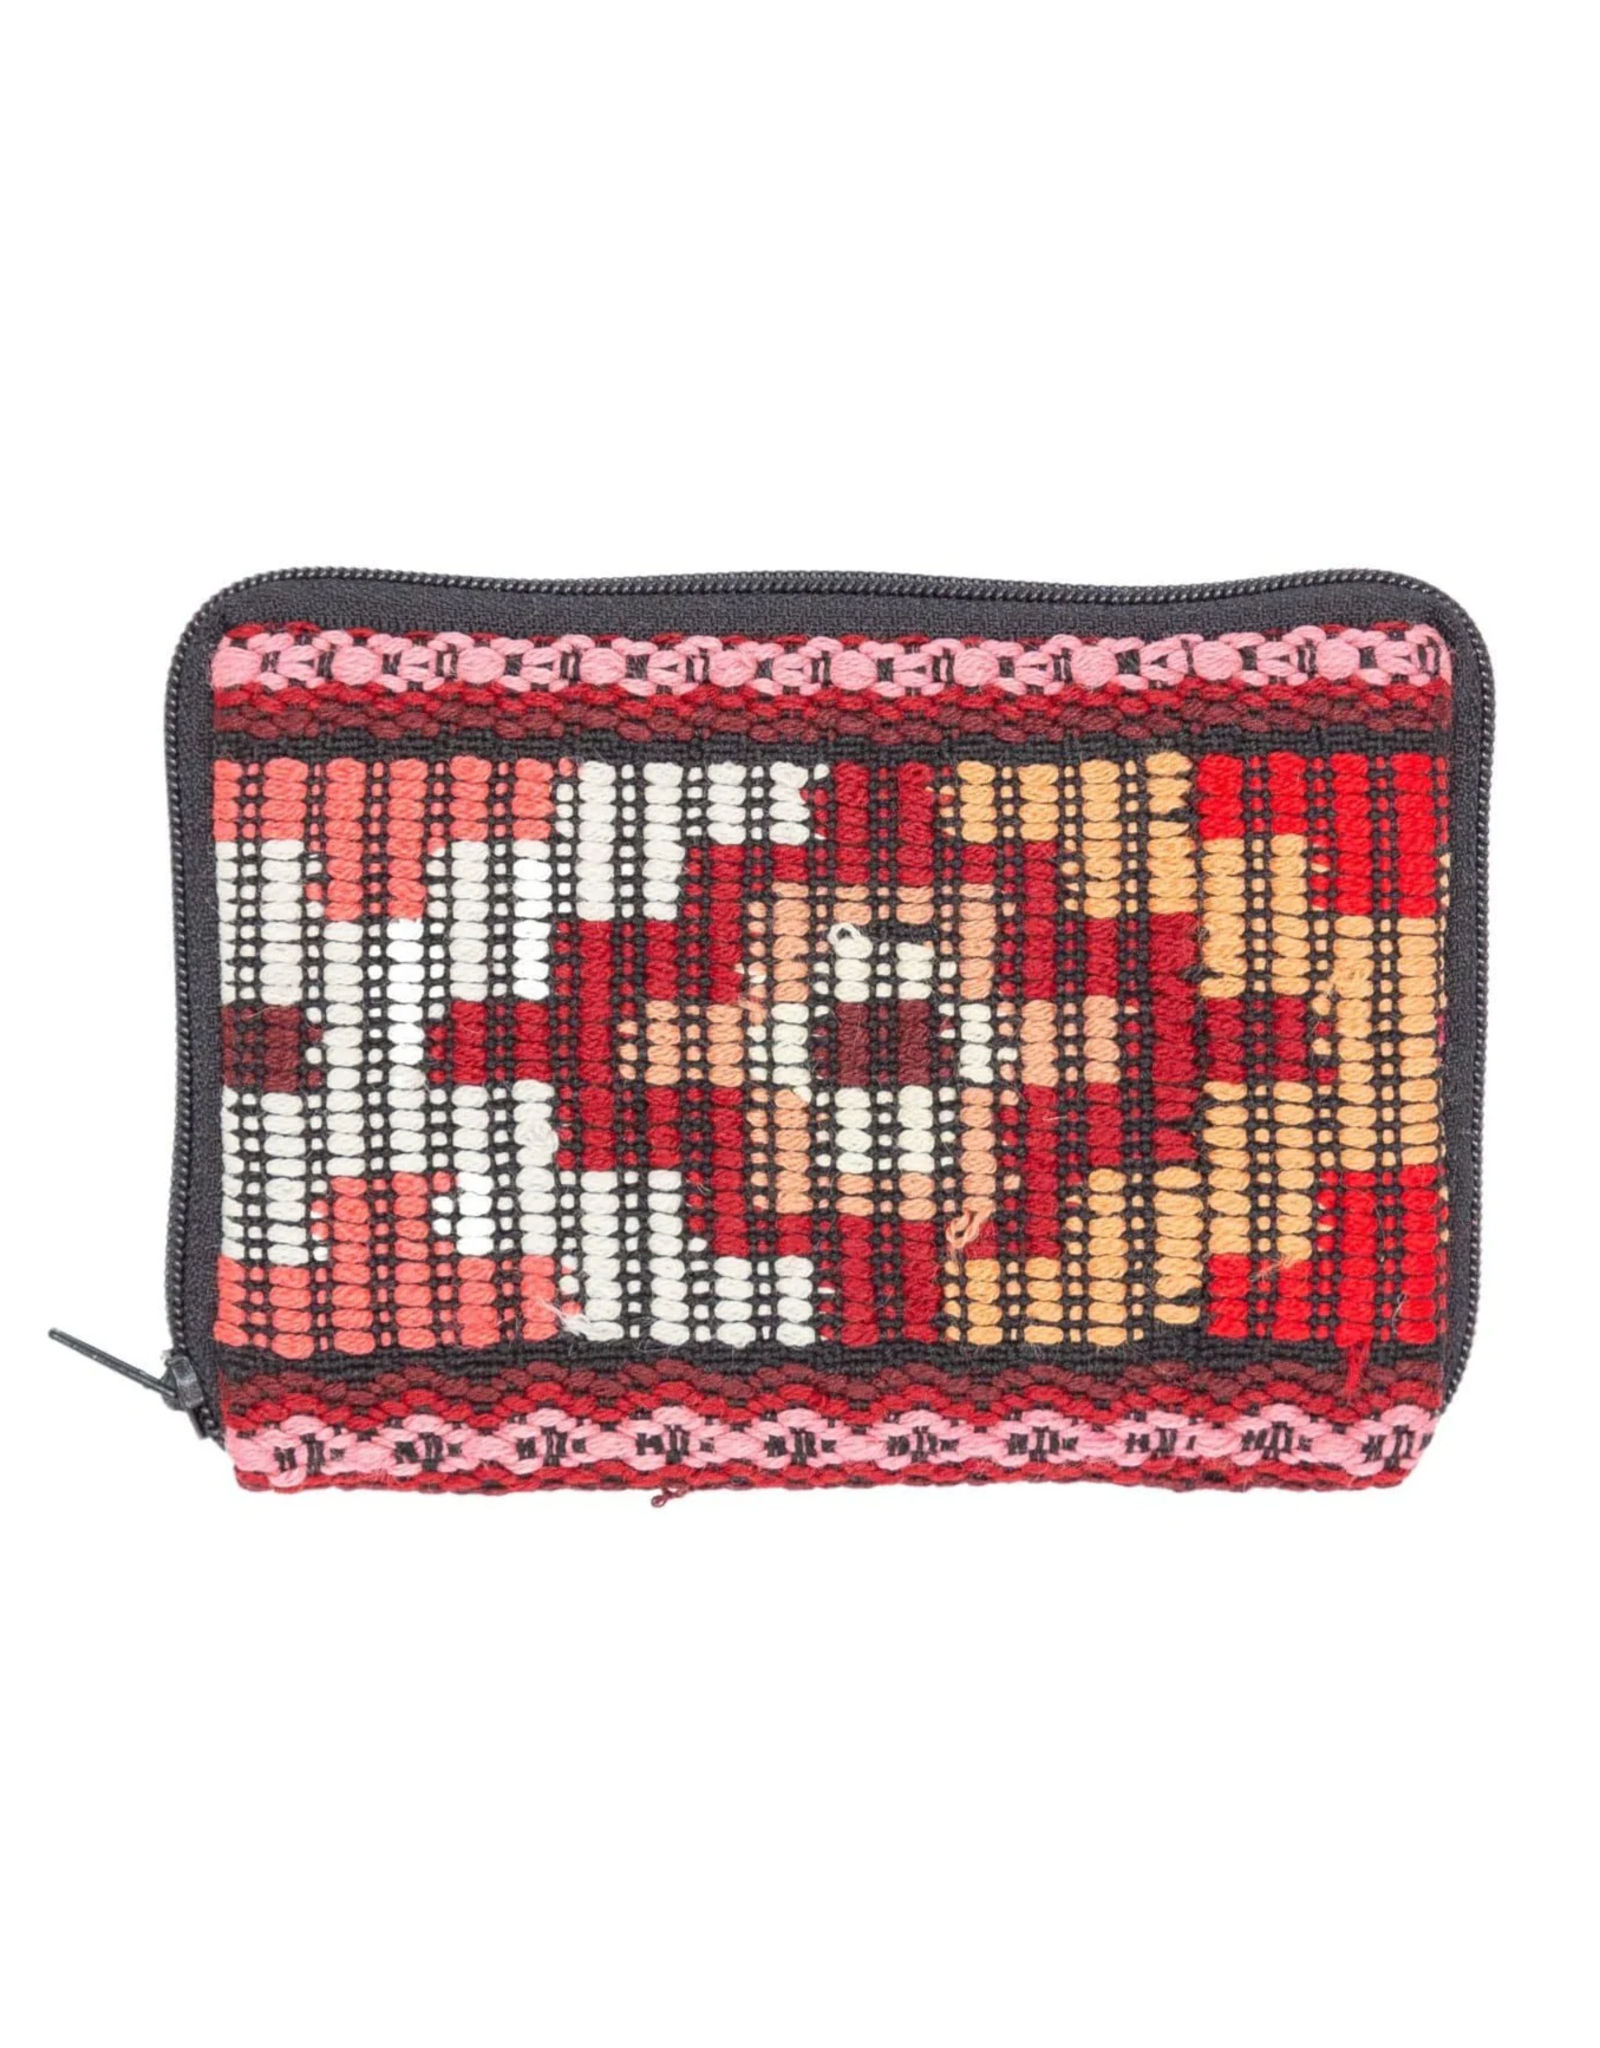 Trade roots Double Pocket Coin Purse & Credit Card Holder, Guatemala